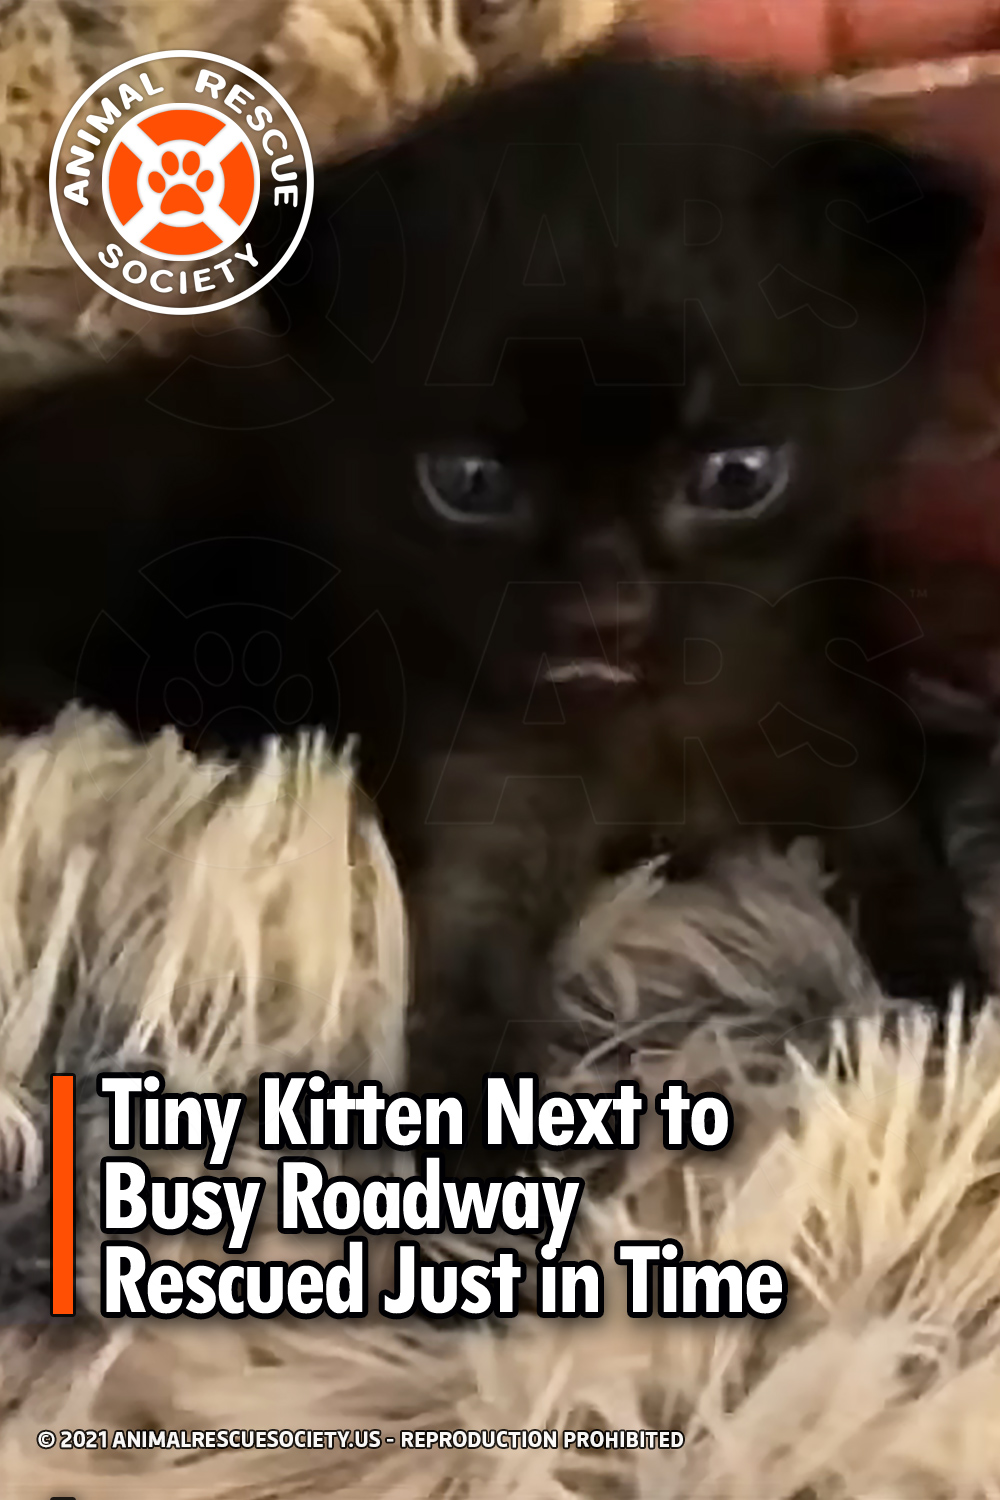 Tiny Kitten Next to Busy Roadway Rescued Just in Time